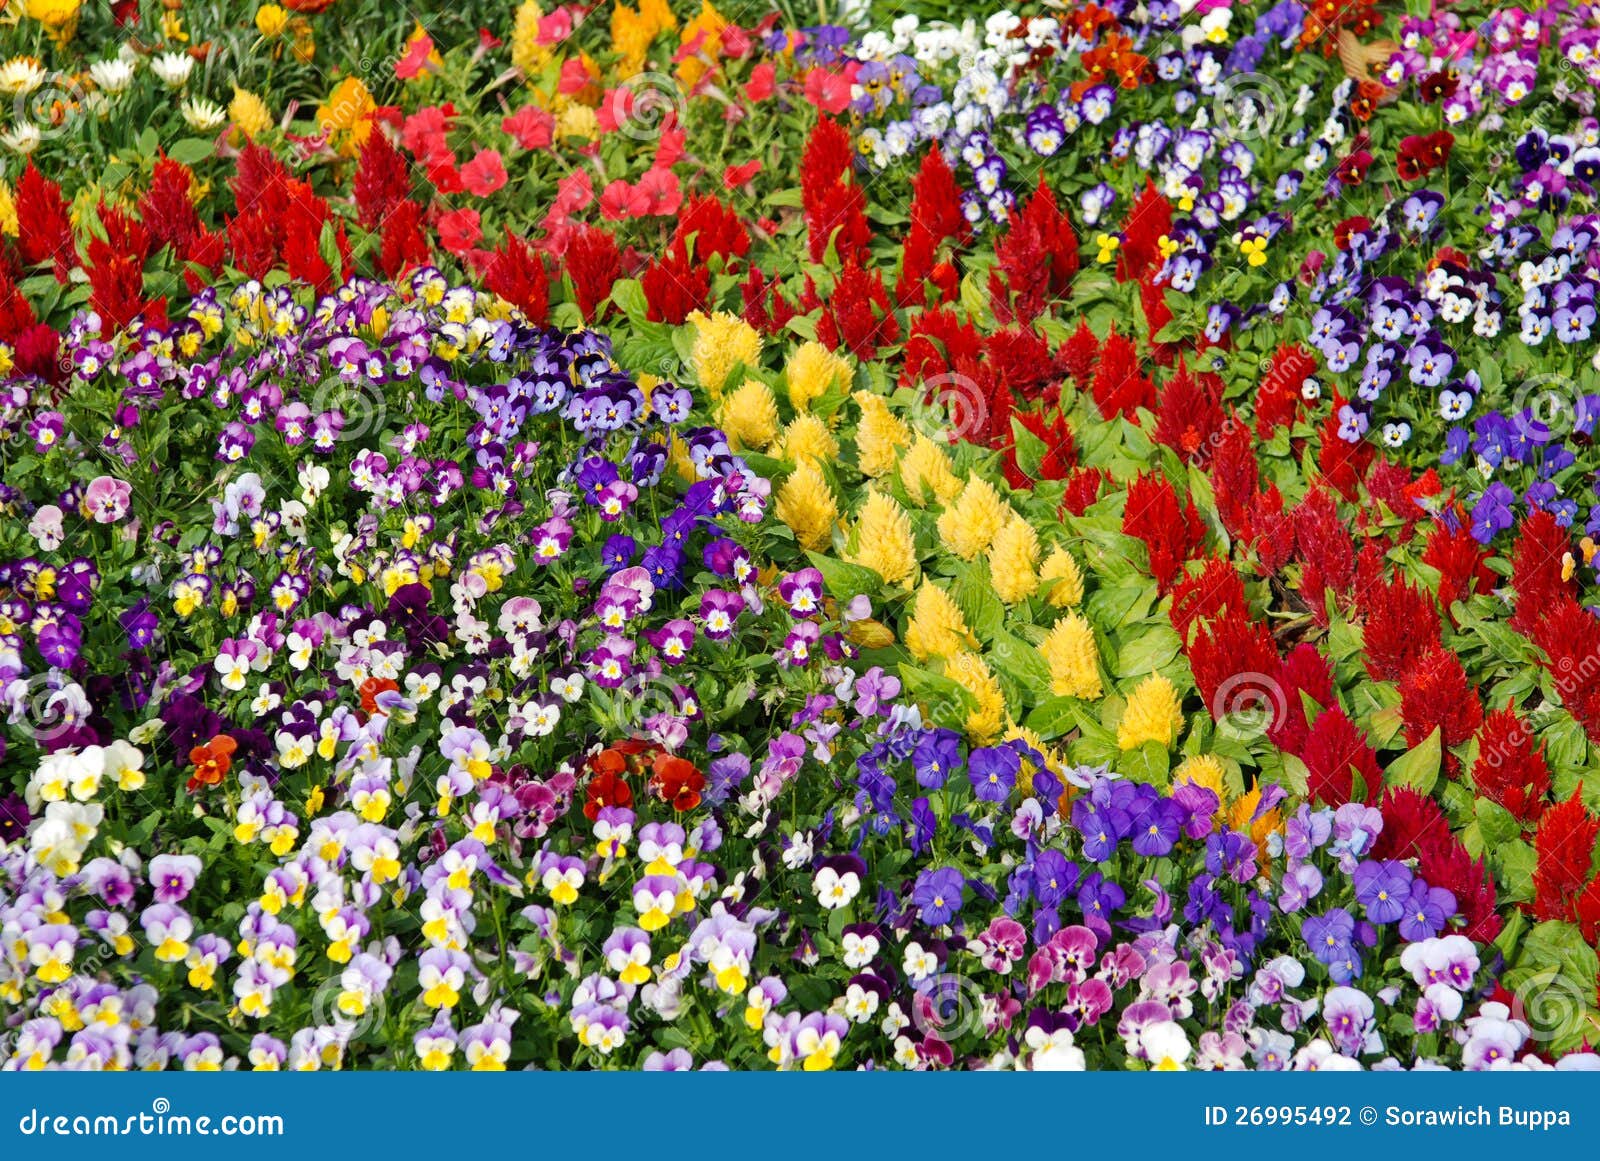 Bed Of Pansies And Cockscomb Flowers Stock Photography - Image ...